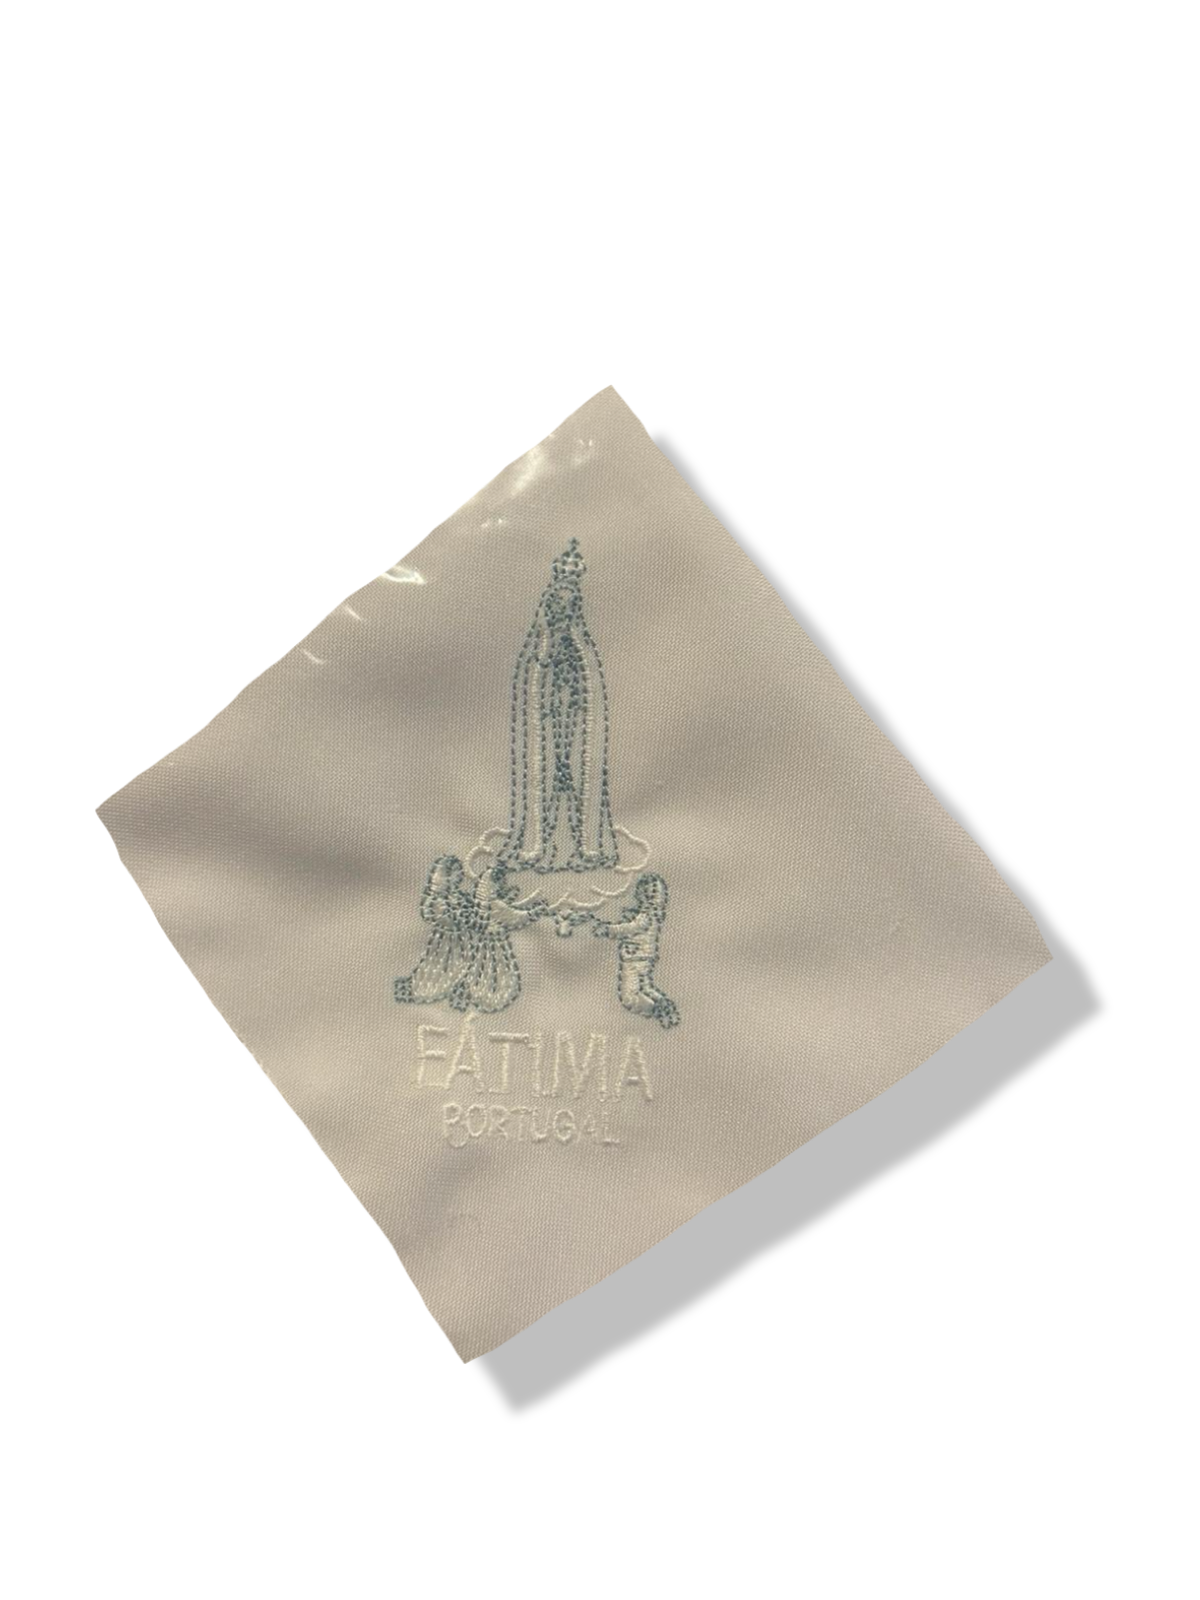 Our Lady of Fatima Handkerchief of Assorted Colors